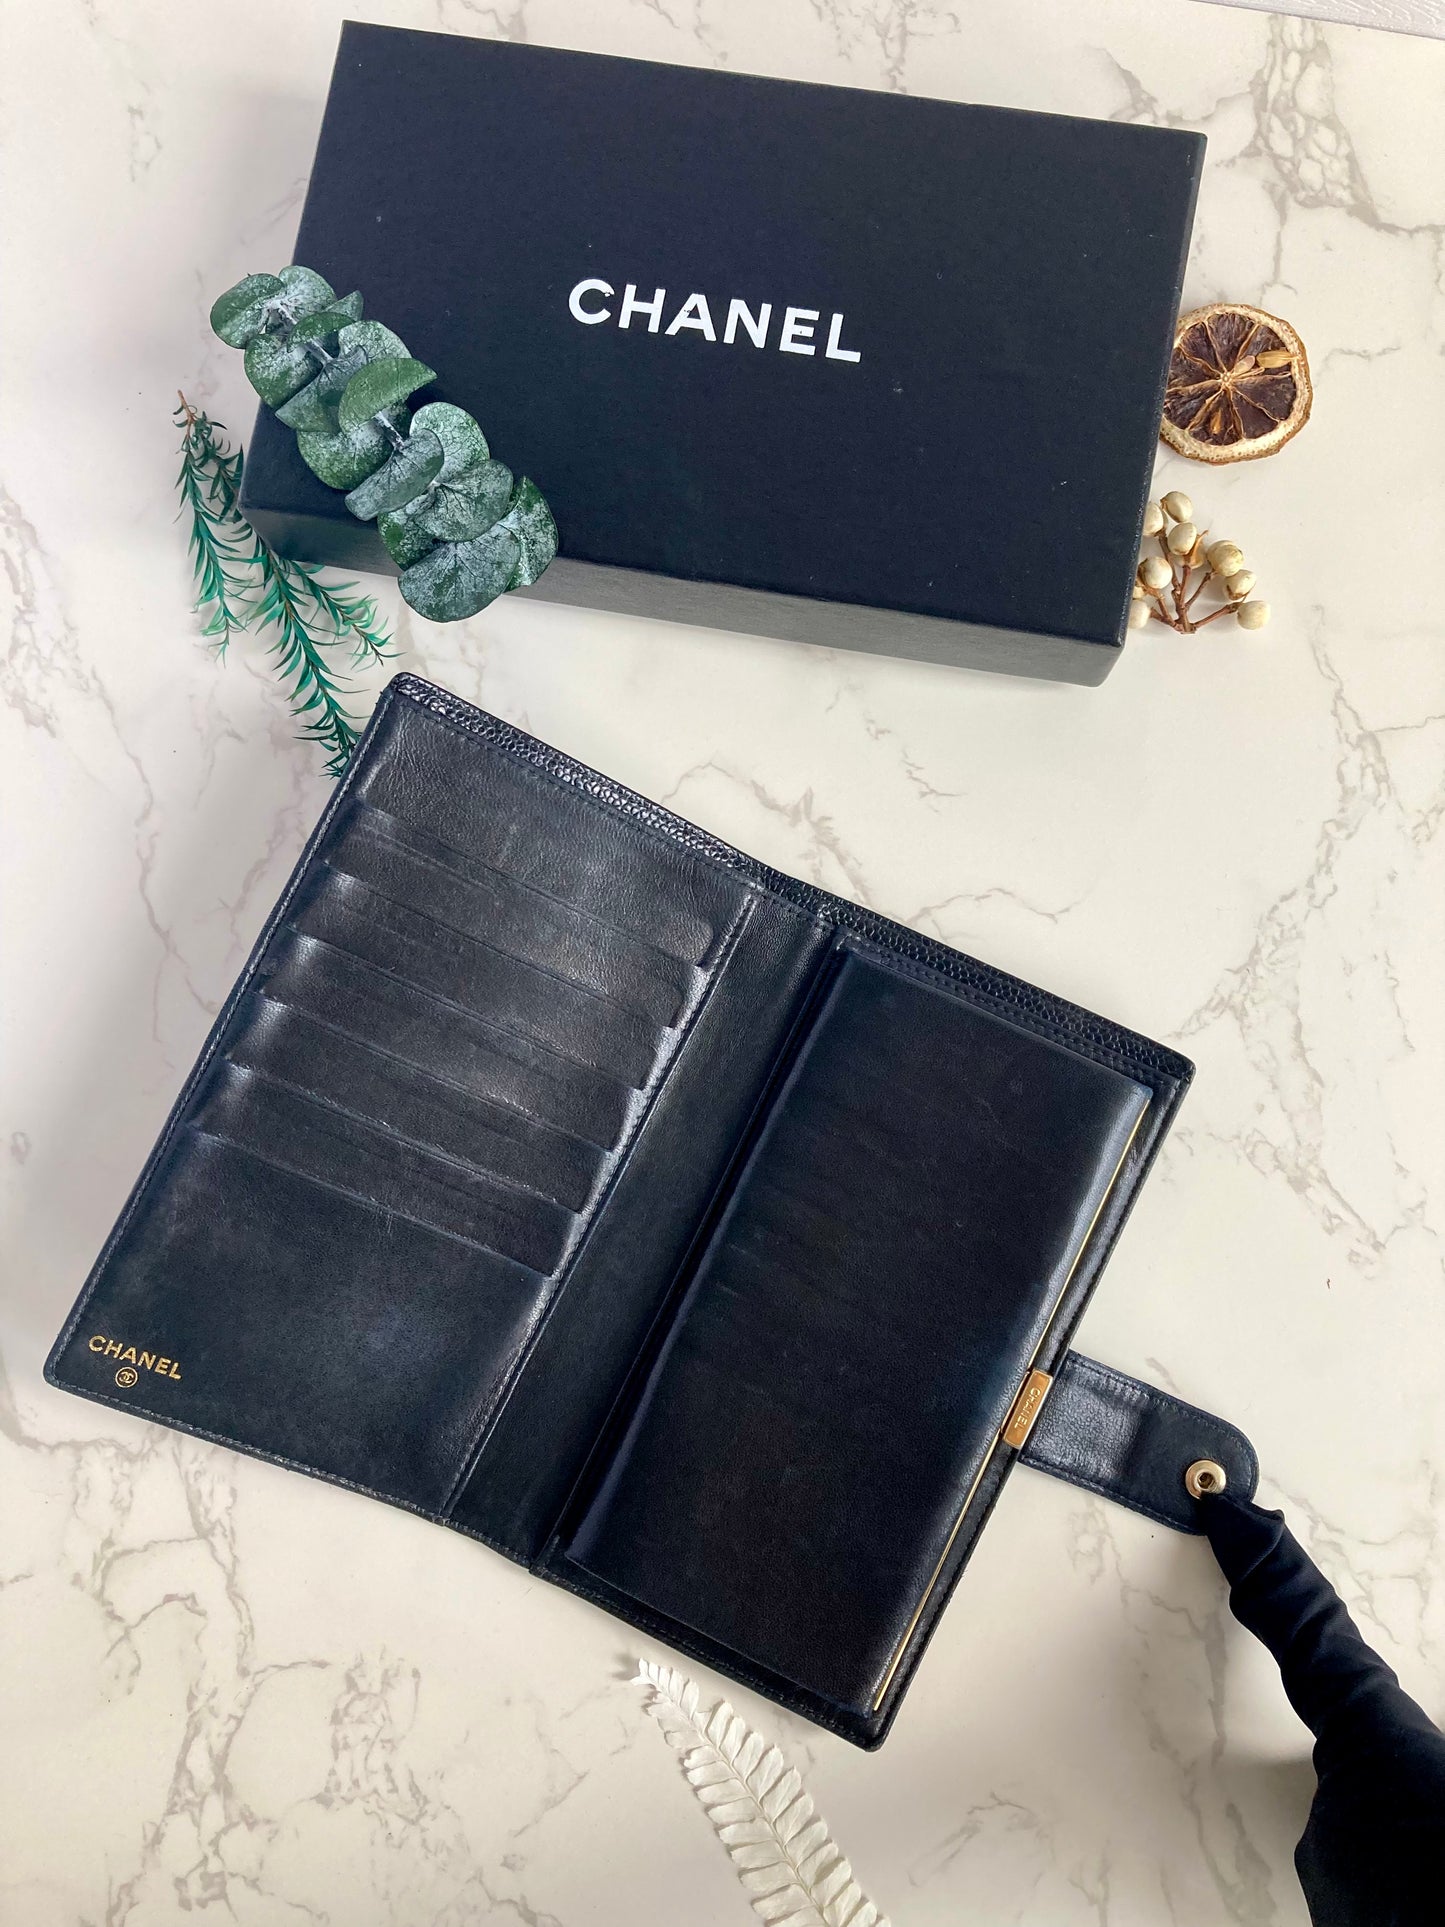 CHANEL Black Caviar Leather Long Wallet with Gold Hardware